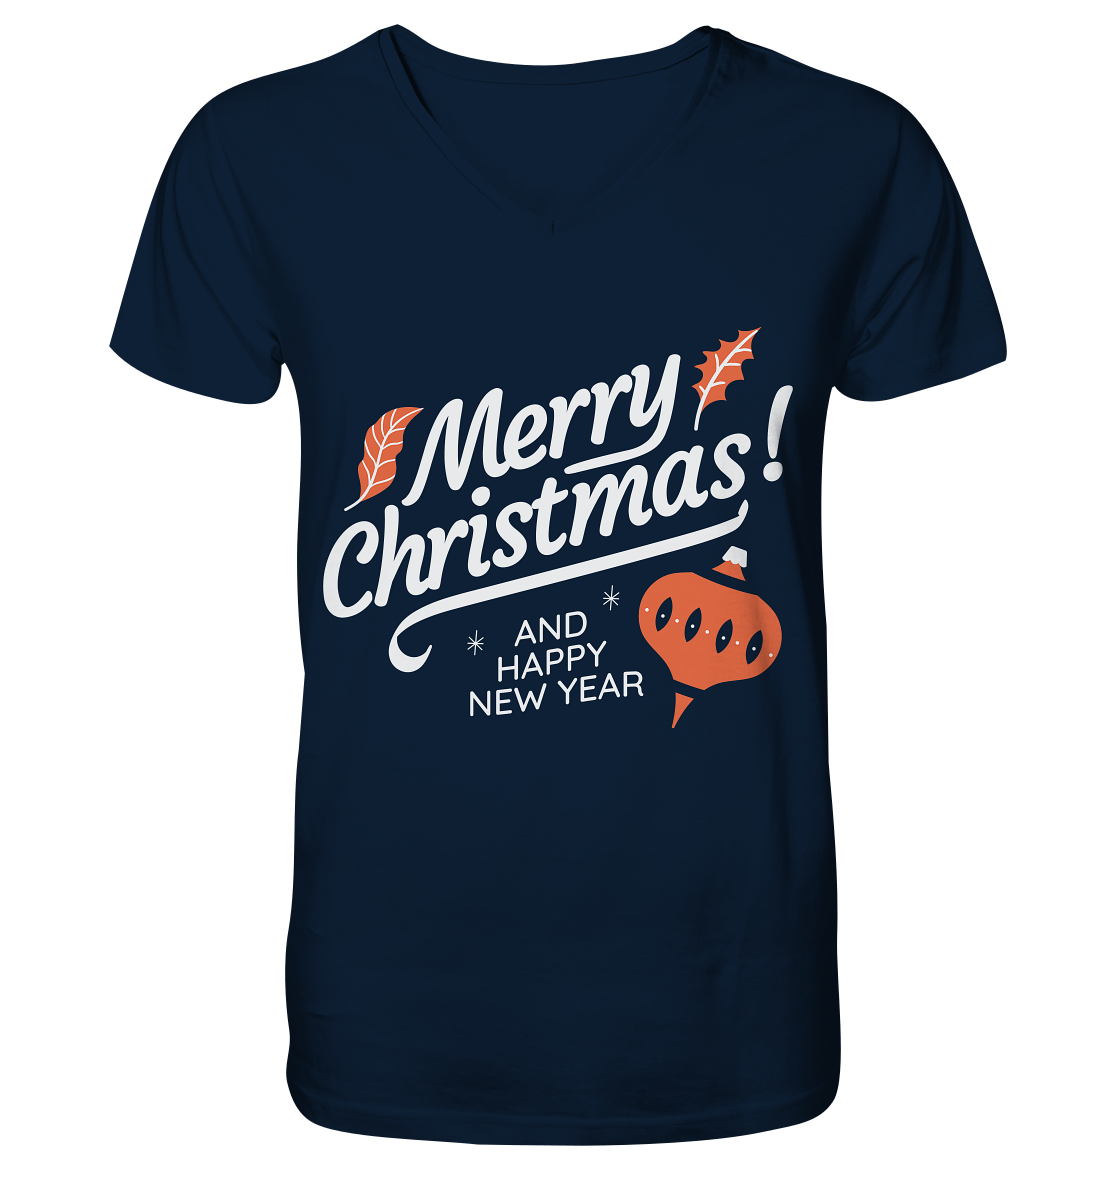 Merry Christmas and a Happy New Year, Merry Christmas and Happy New Year - V-Neck Shirt